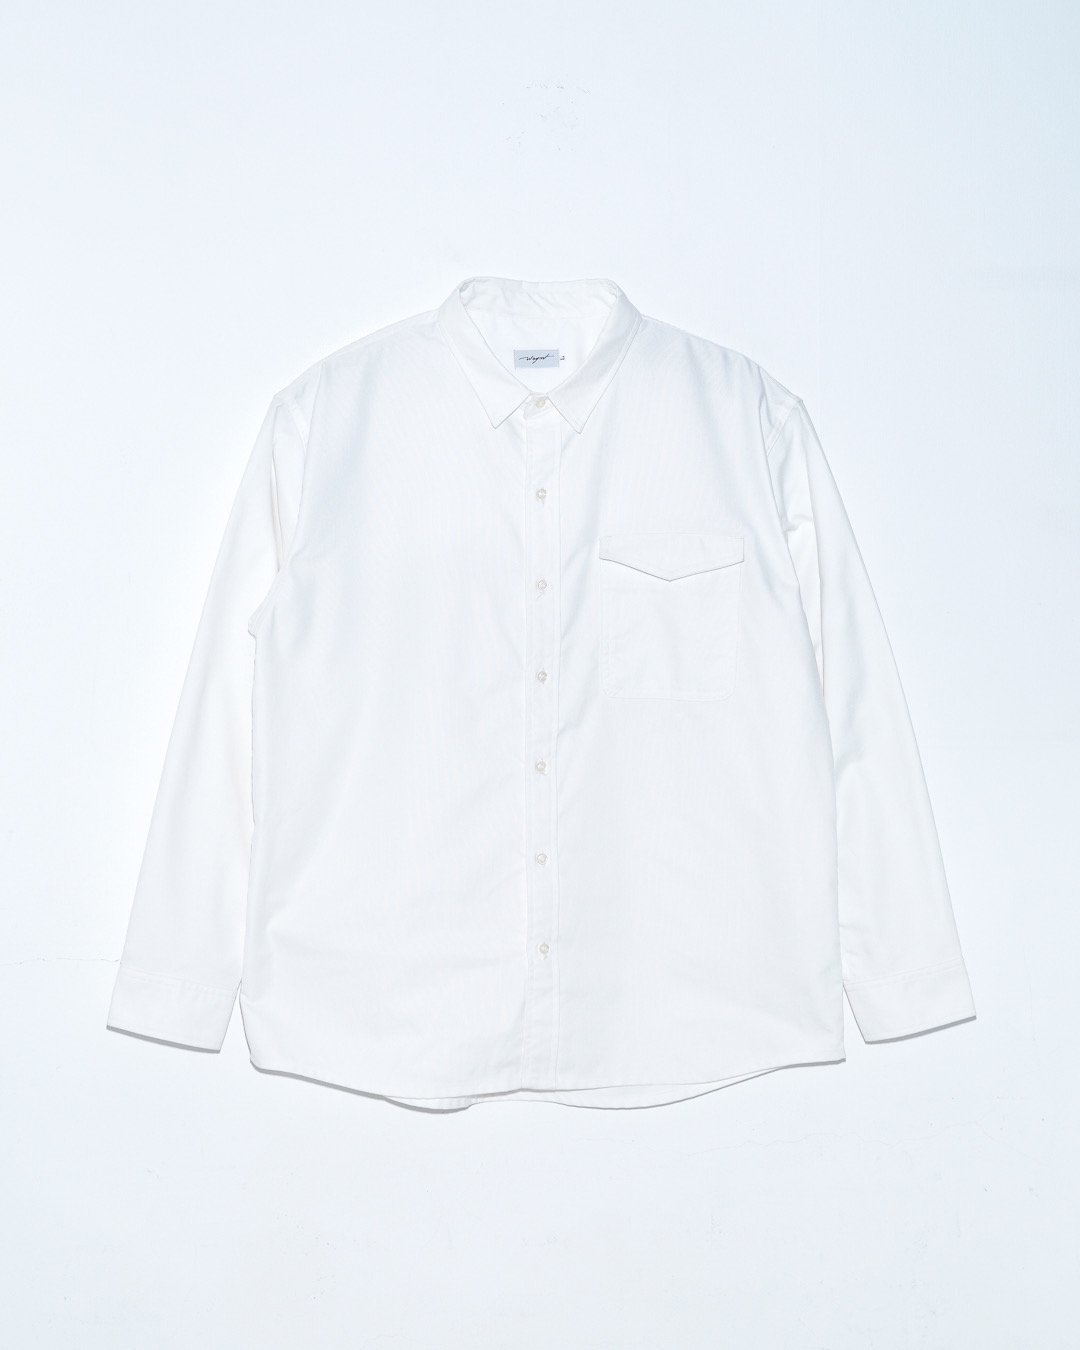 Waynt Store ExclusiveWhite Oxford 002 SHIRT